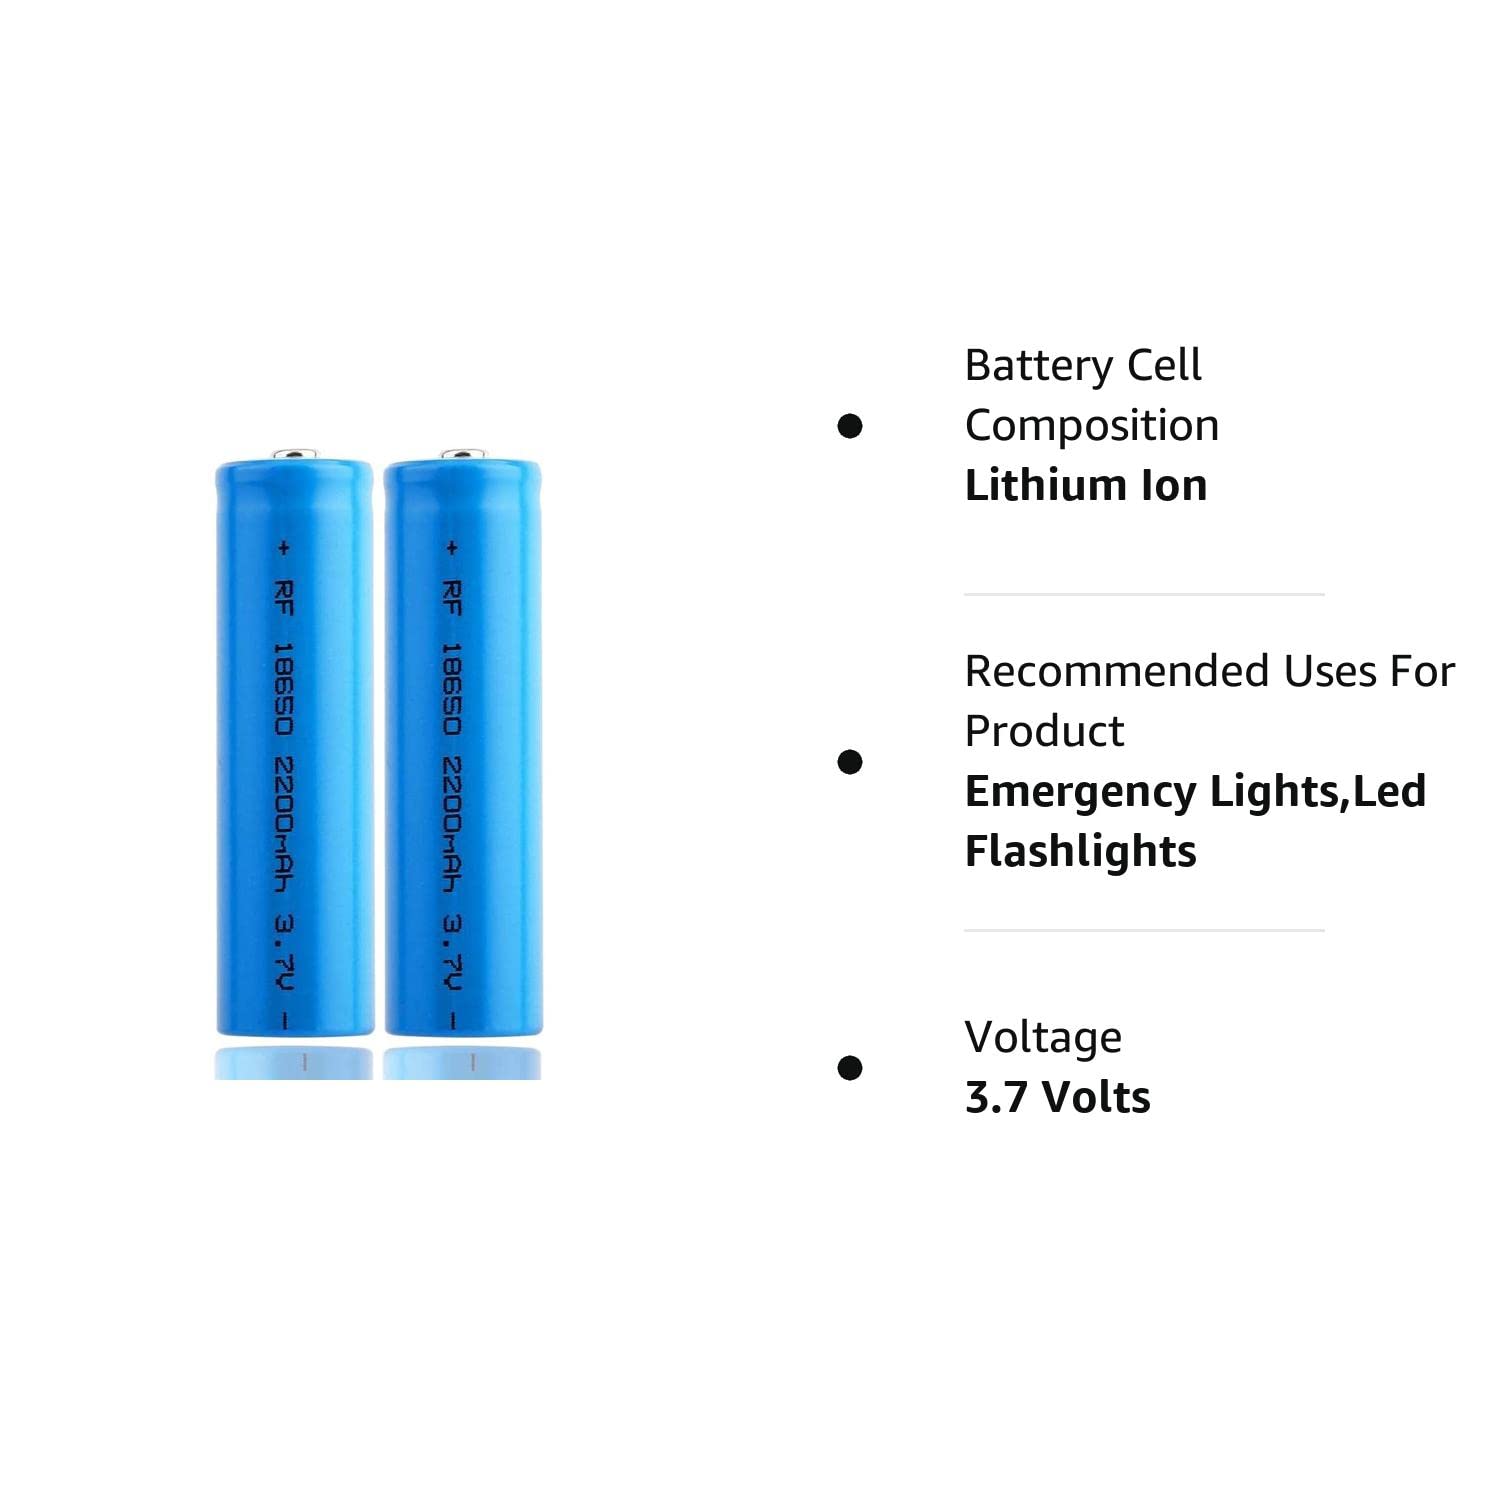 Qsincth Rechargeable Battery 3.7v Lithium-ion Battery Button Top Batteries 2200mAh for Strong Light flashlights，Electronic Devices (2 PCS)